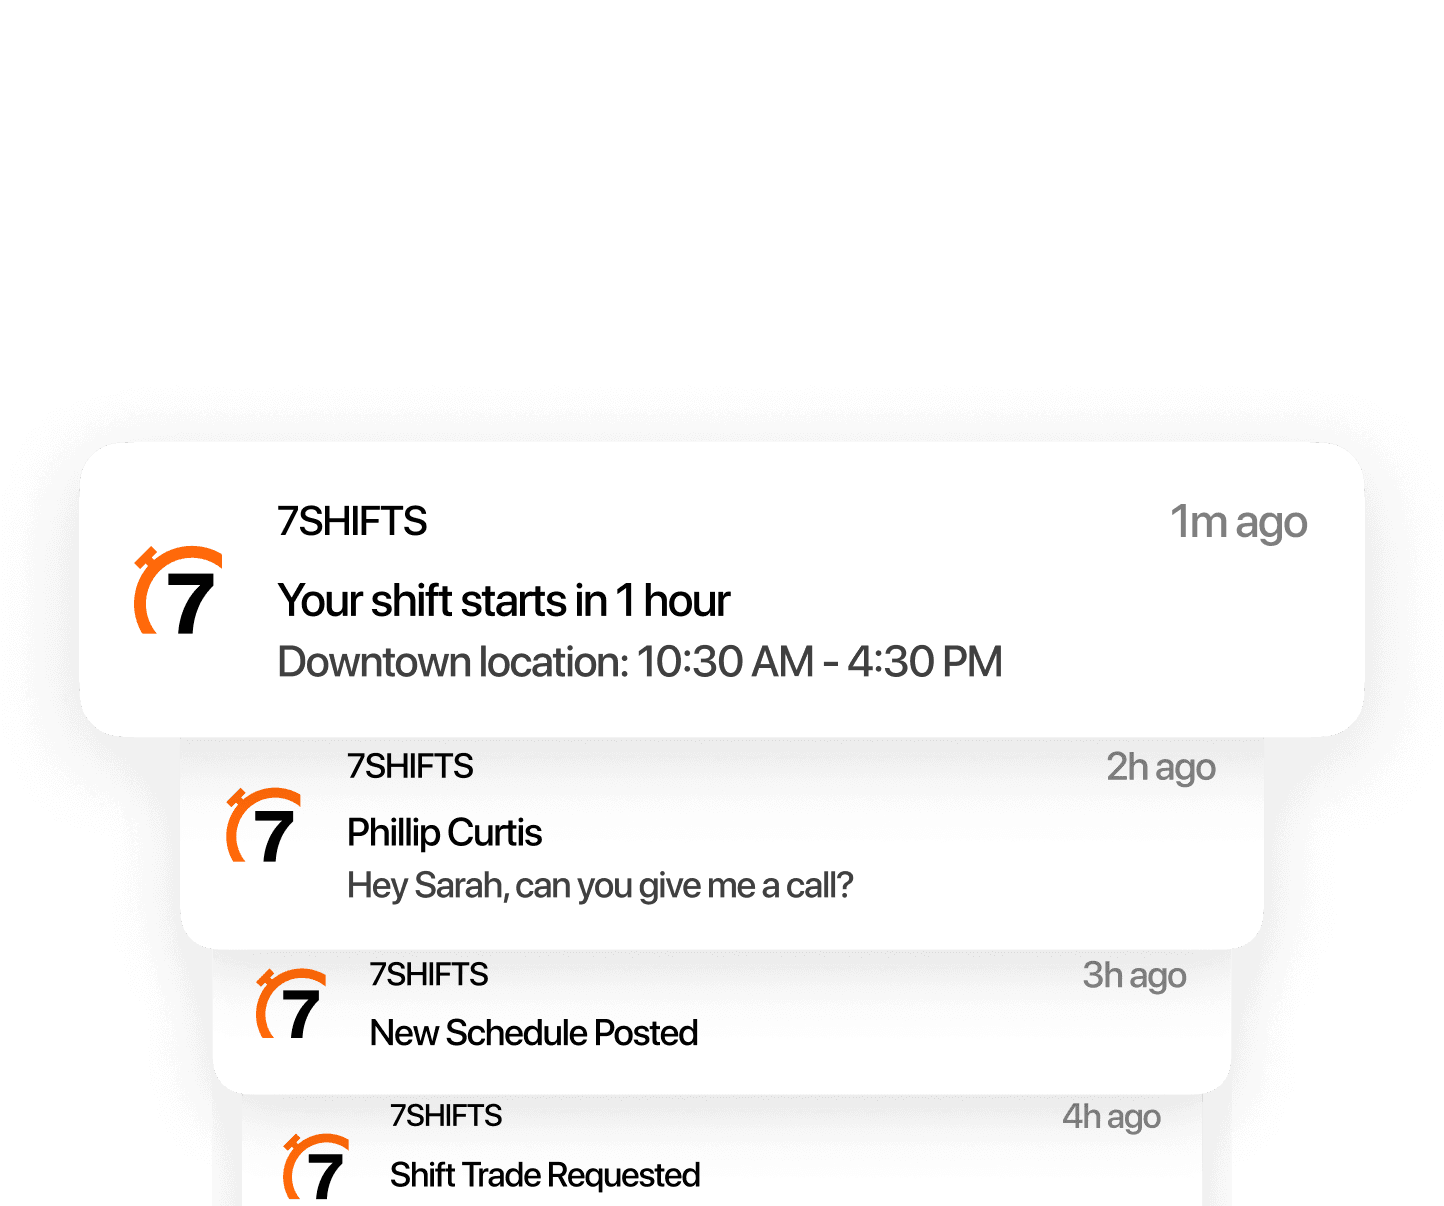 7shifts mobile app notifications for restaurant employees, including shift reminders and chat messages